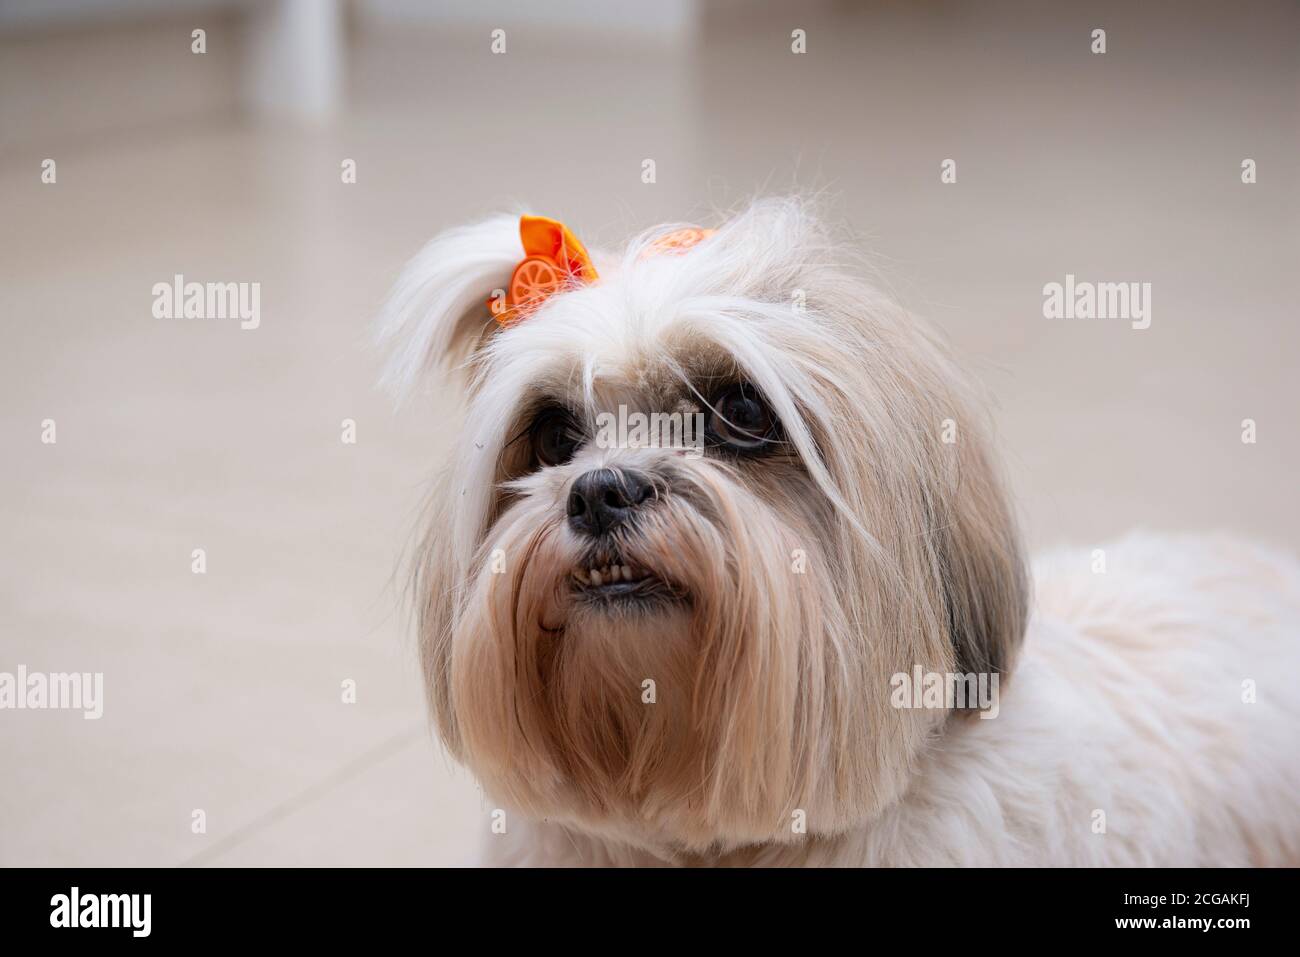 Close up of lhasa apso dog with orange bow. small domestic animal. Stock Photo